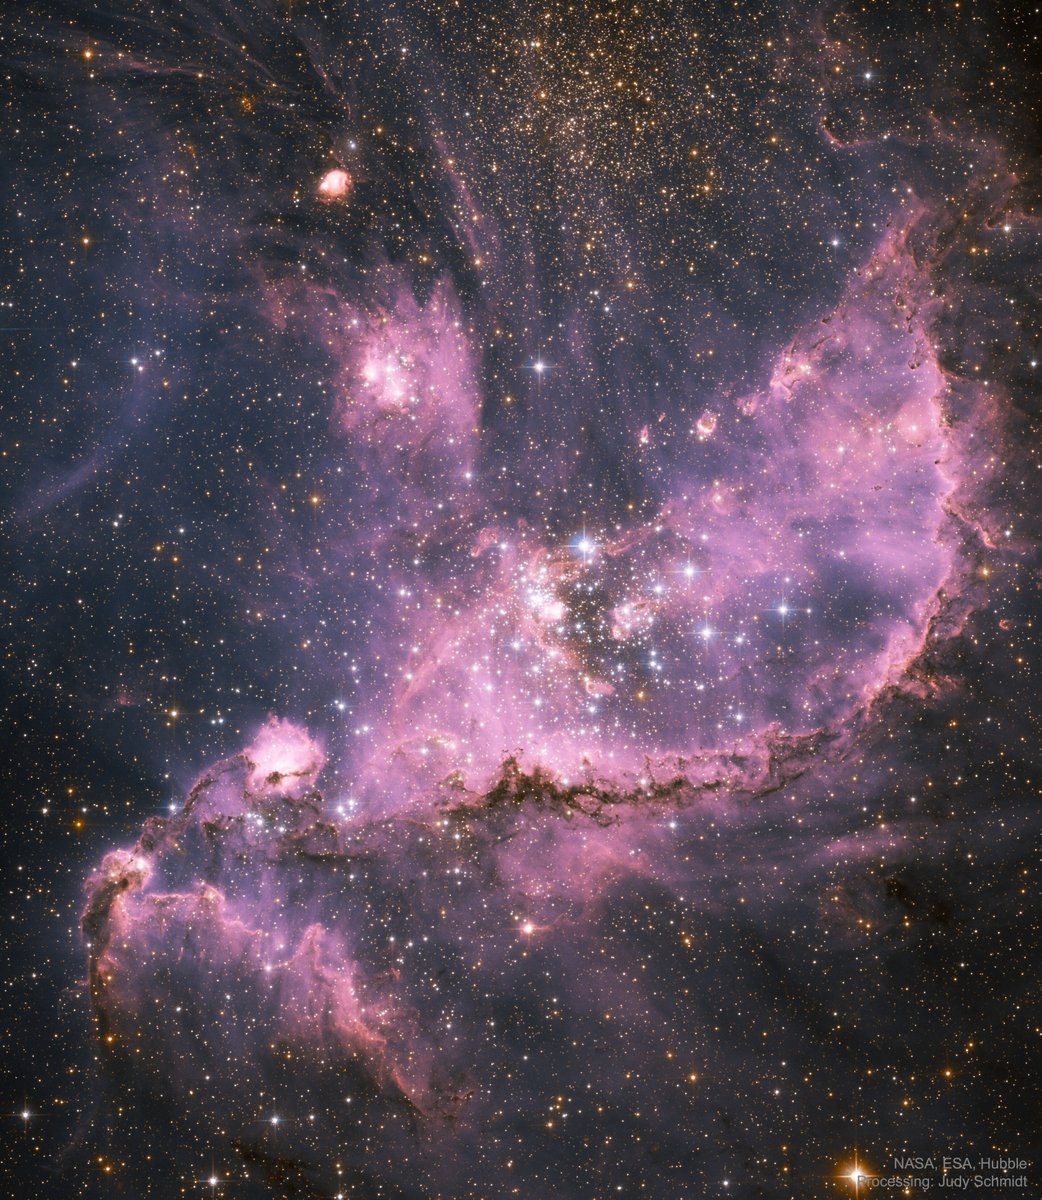 SURPRISE we’re back to Hubble images. NGC 346, a star forming cluster in the Small Magellanic Cloud. Image Credit: NASA, ESA, HubbleProcessing:  @SpaceGeck